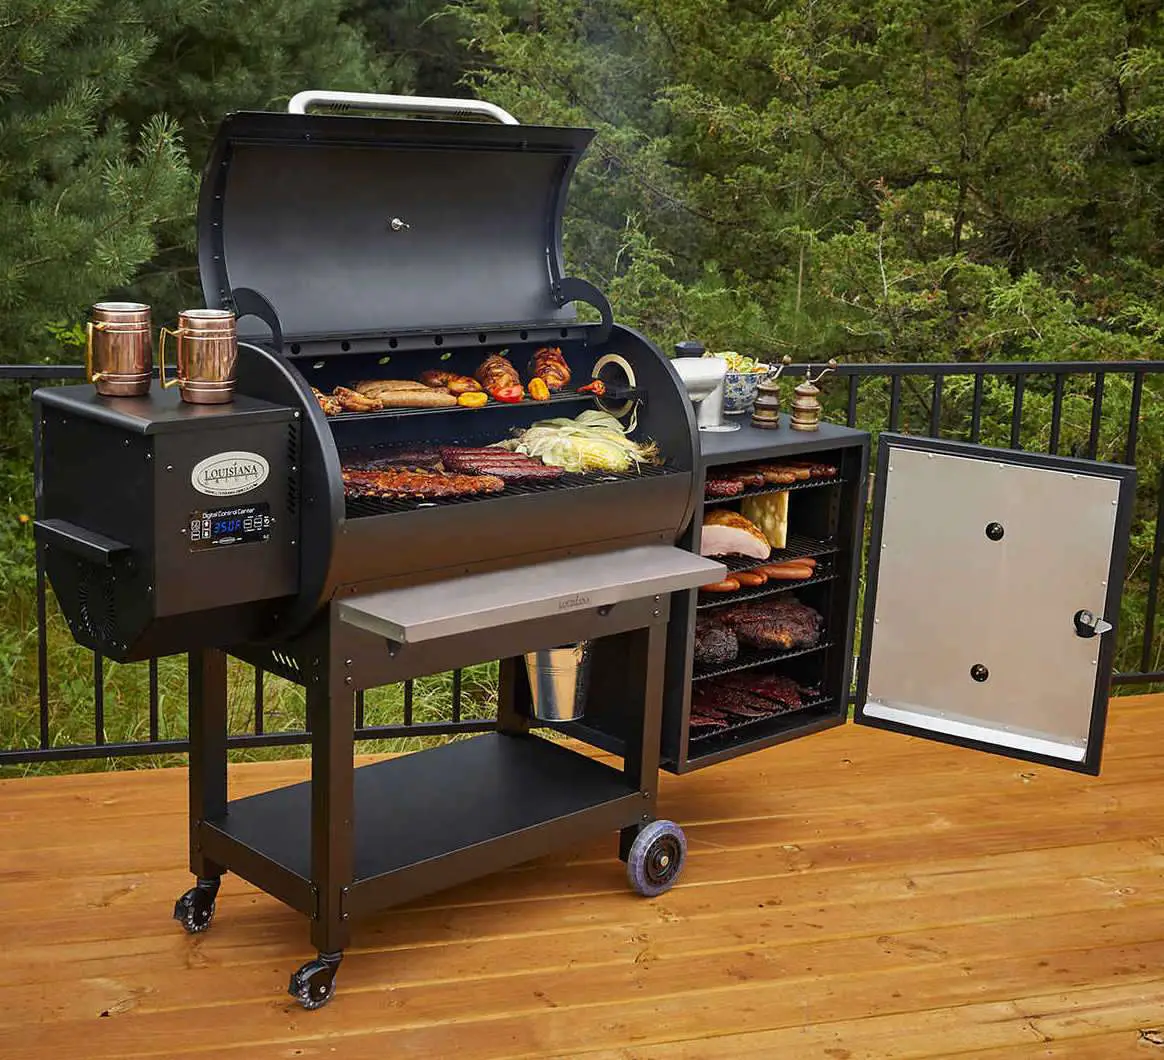 Costco offers its members the Louisiana Grills Champion ...